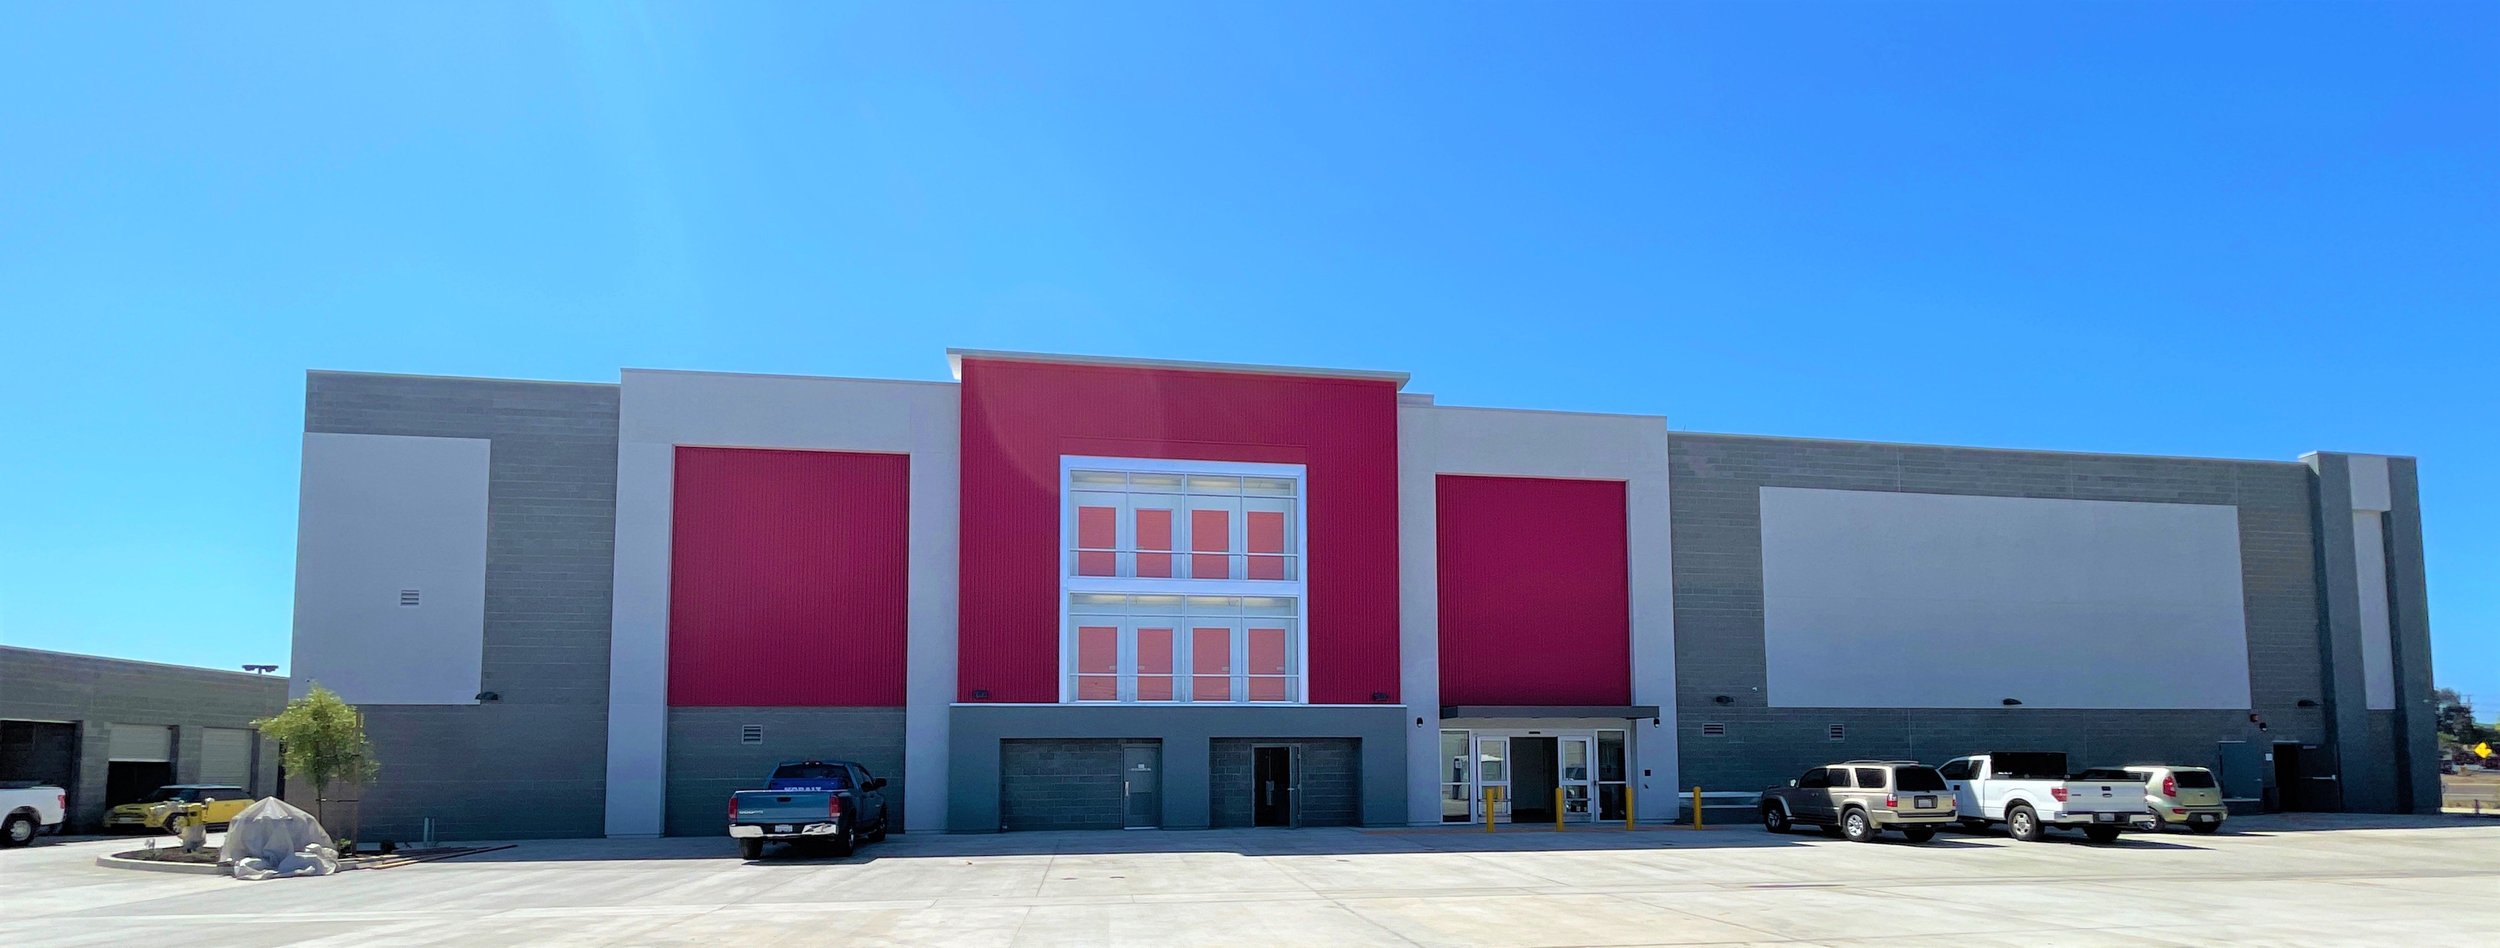 DAI Our Work Current Projects Chula Vista Self-Storage September 2022 3.jpg